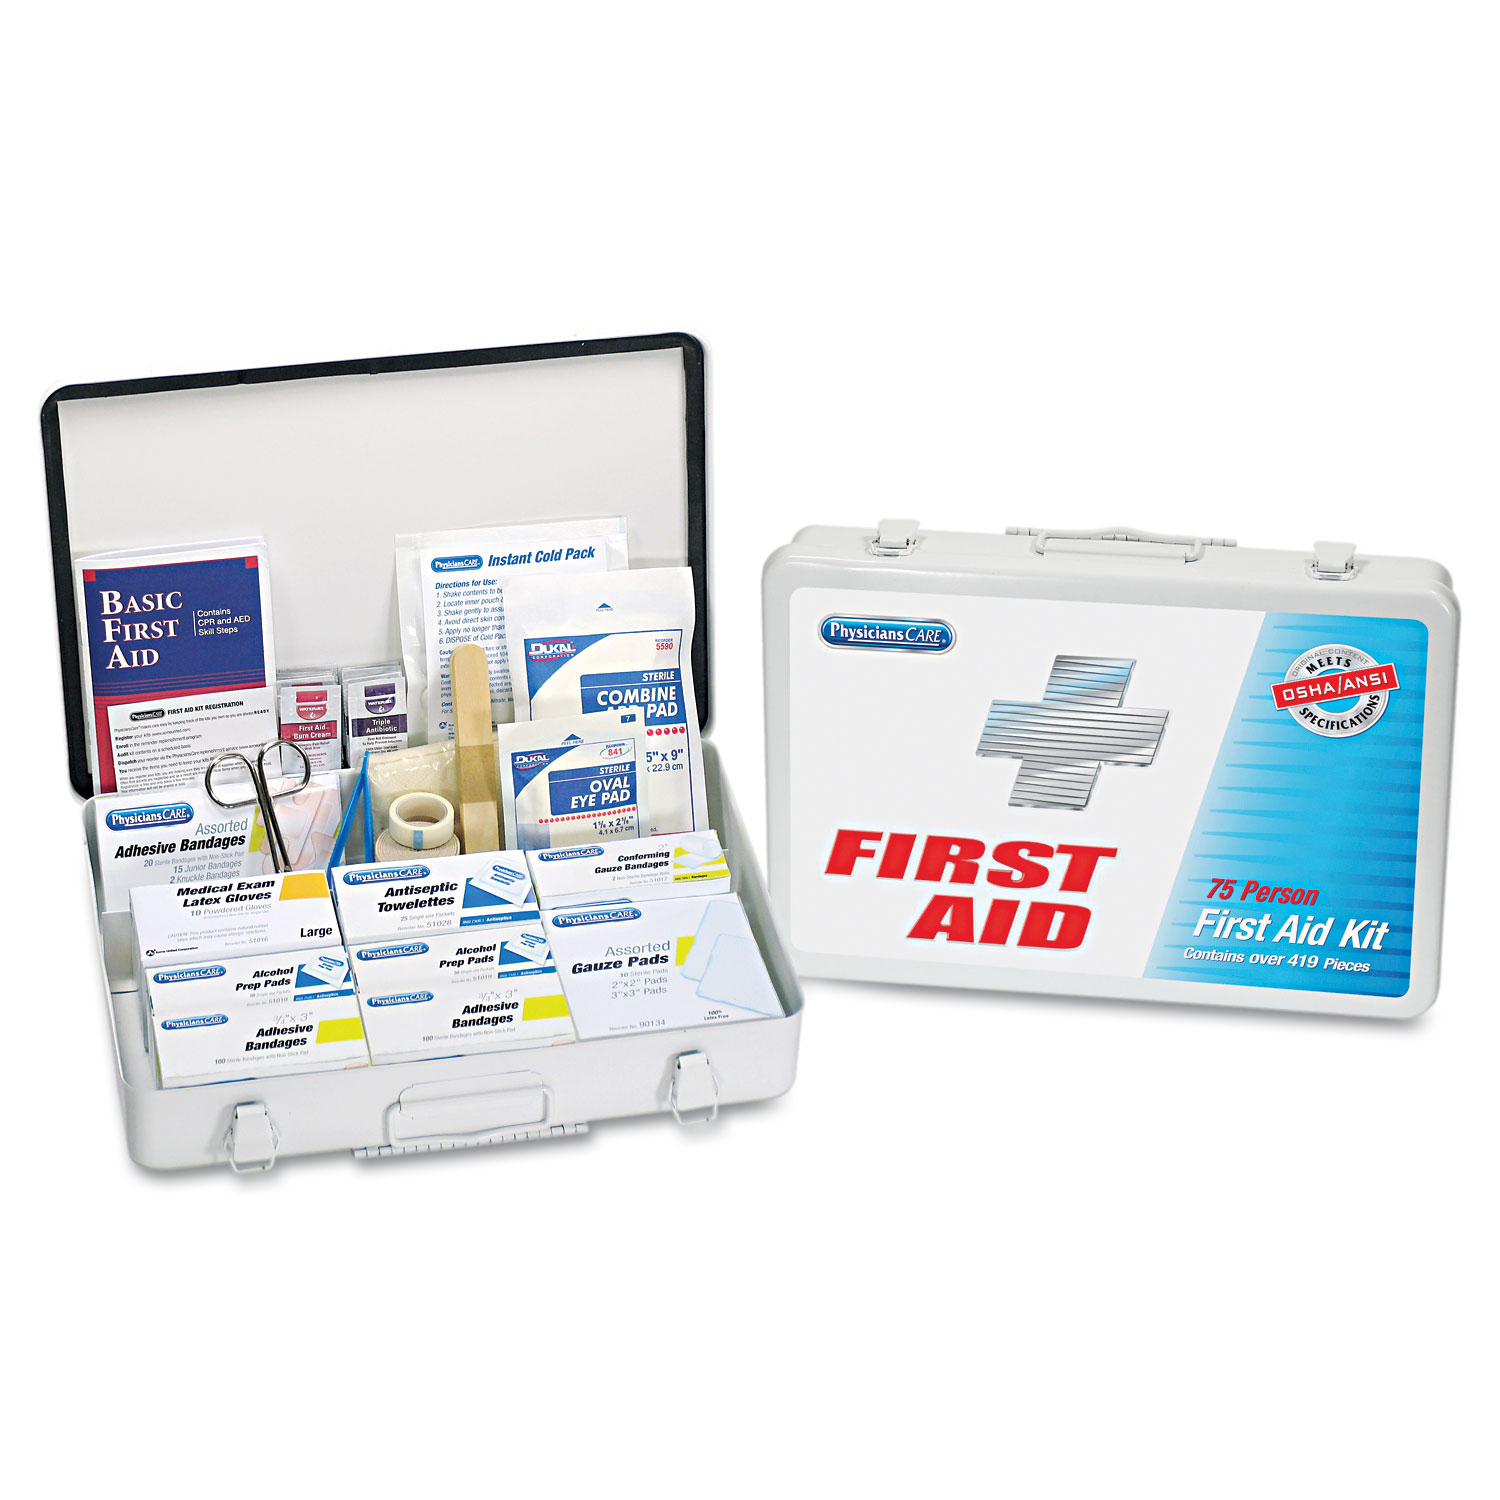  PhysiciansCare by First Aid Only 90018-001 First Aid Kit for up to 75 People, Metal, 419 Pieces/Kit (FAO90018) 